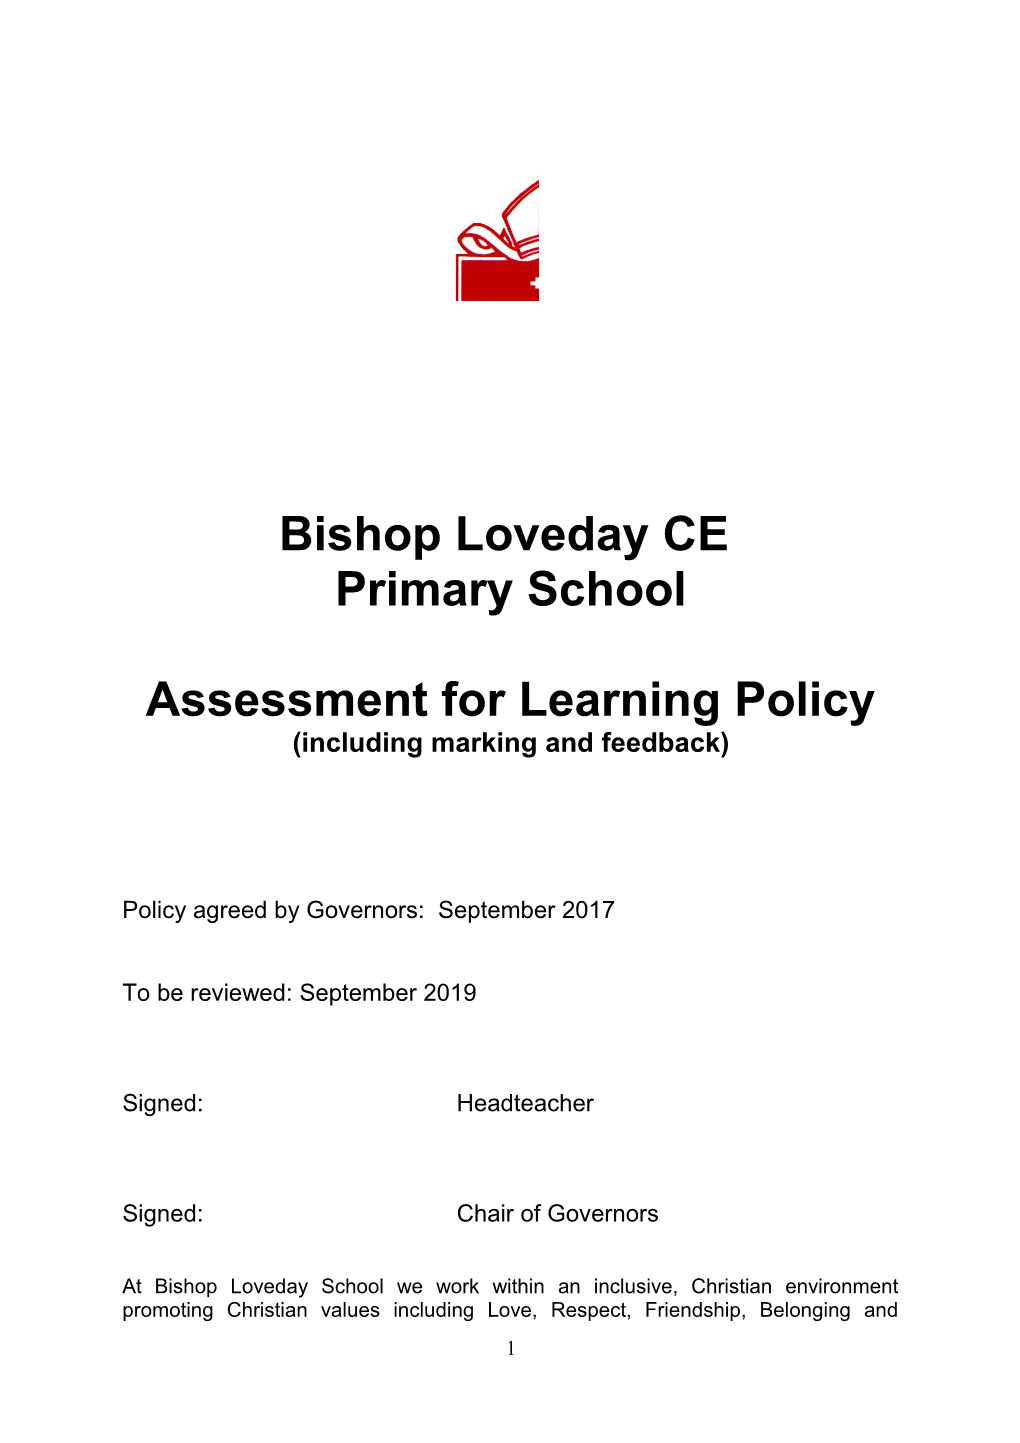 Assessment for Learning Policy